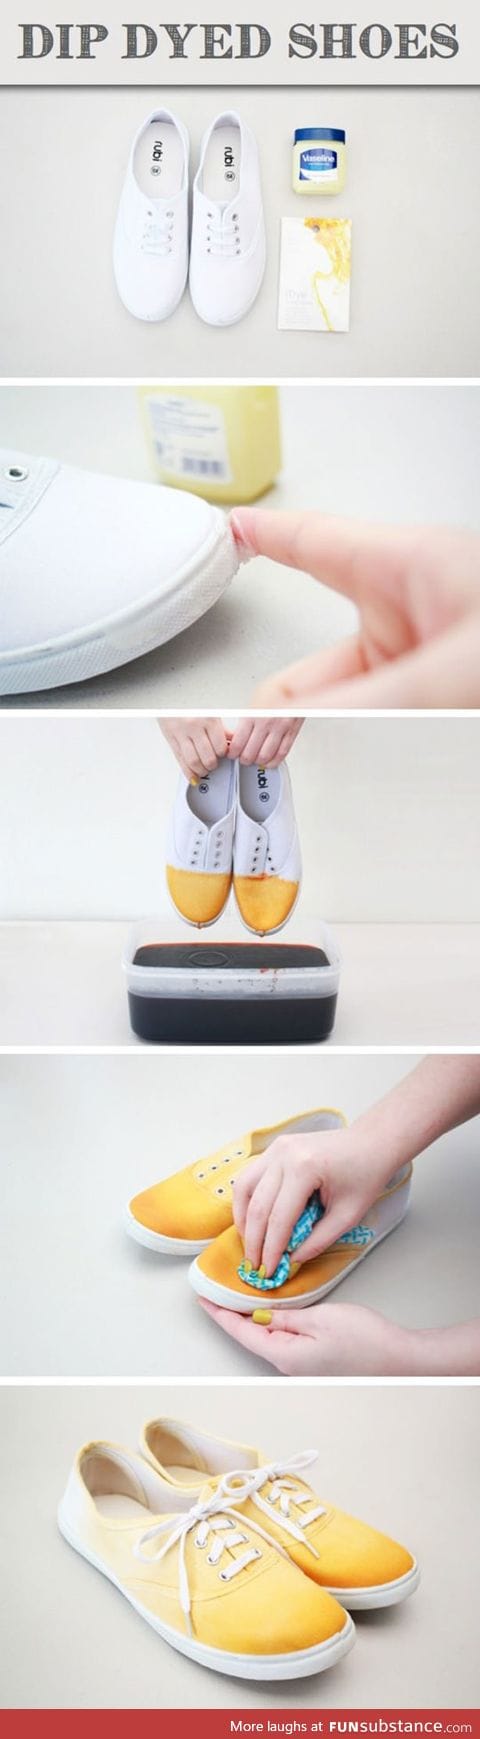 Dye your shoes with an interesting color